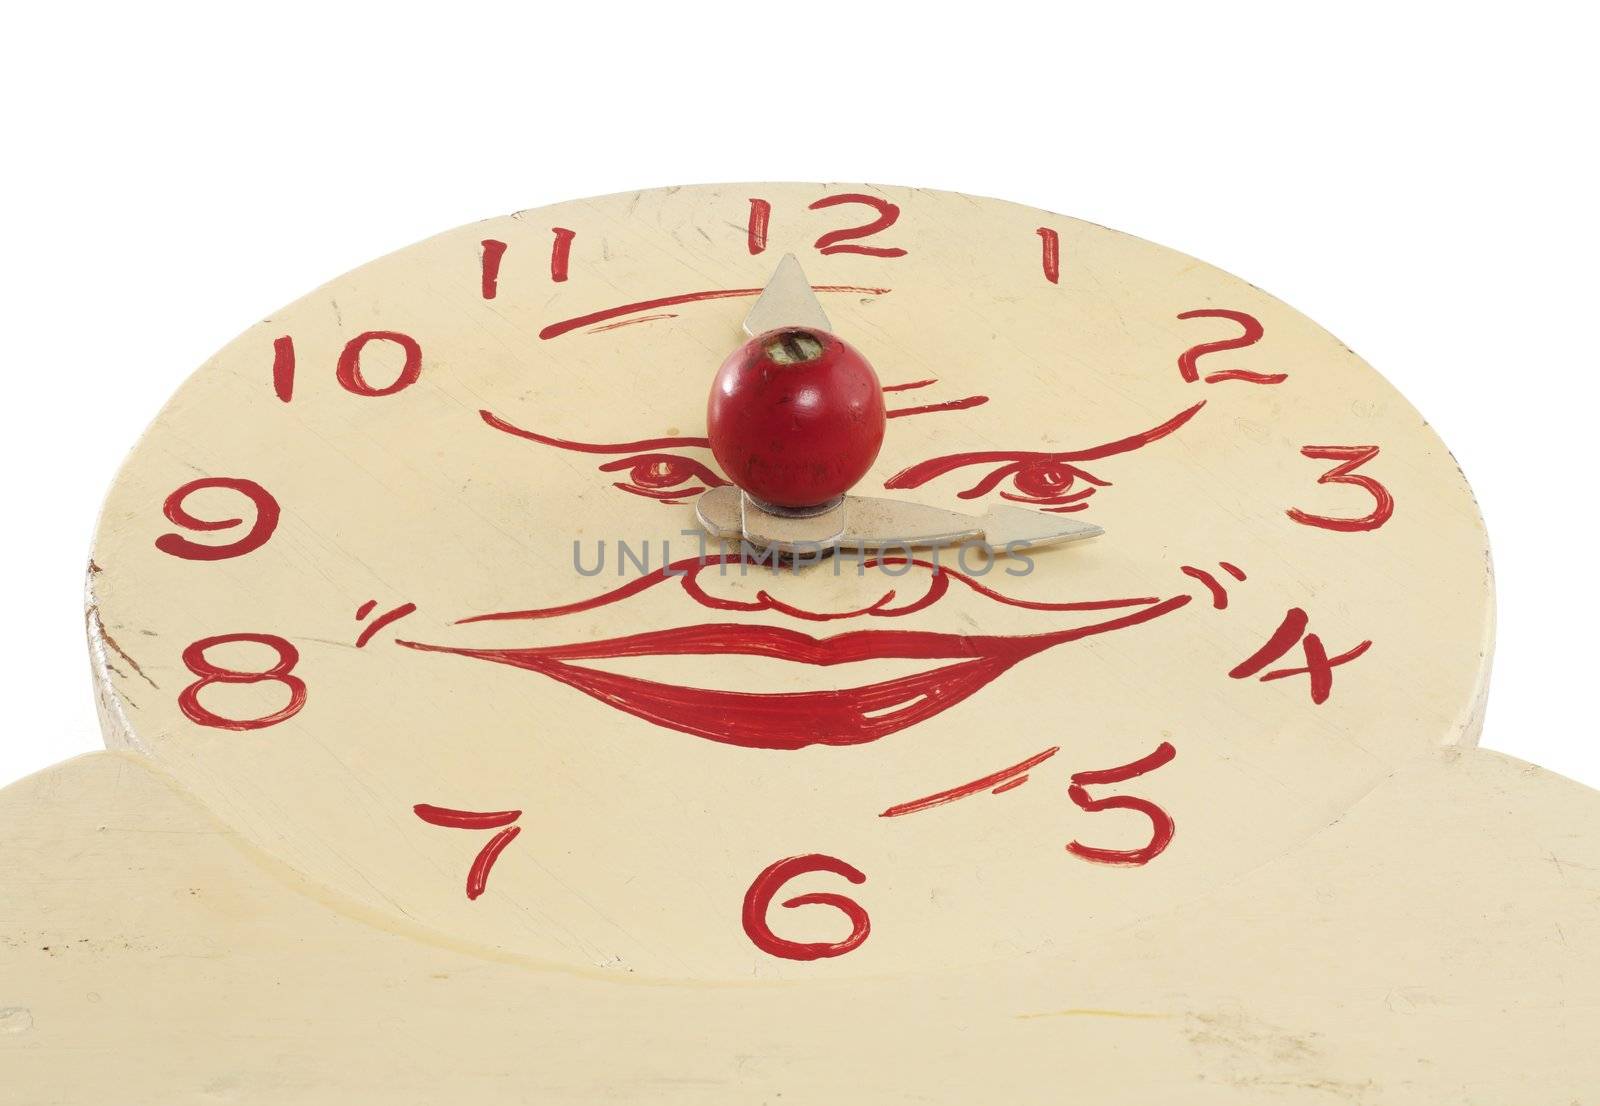 Old Handmade Wooden Toy Clock face by Em3